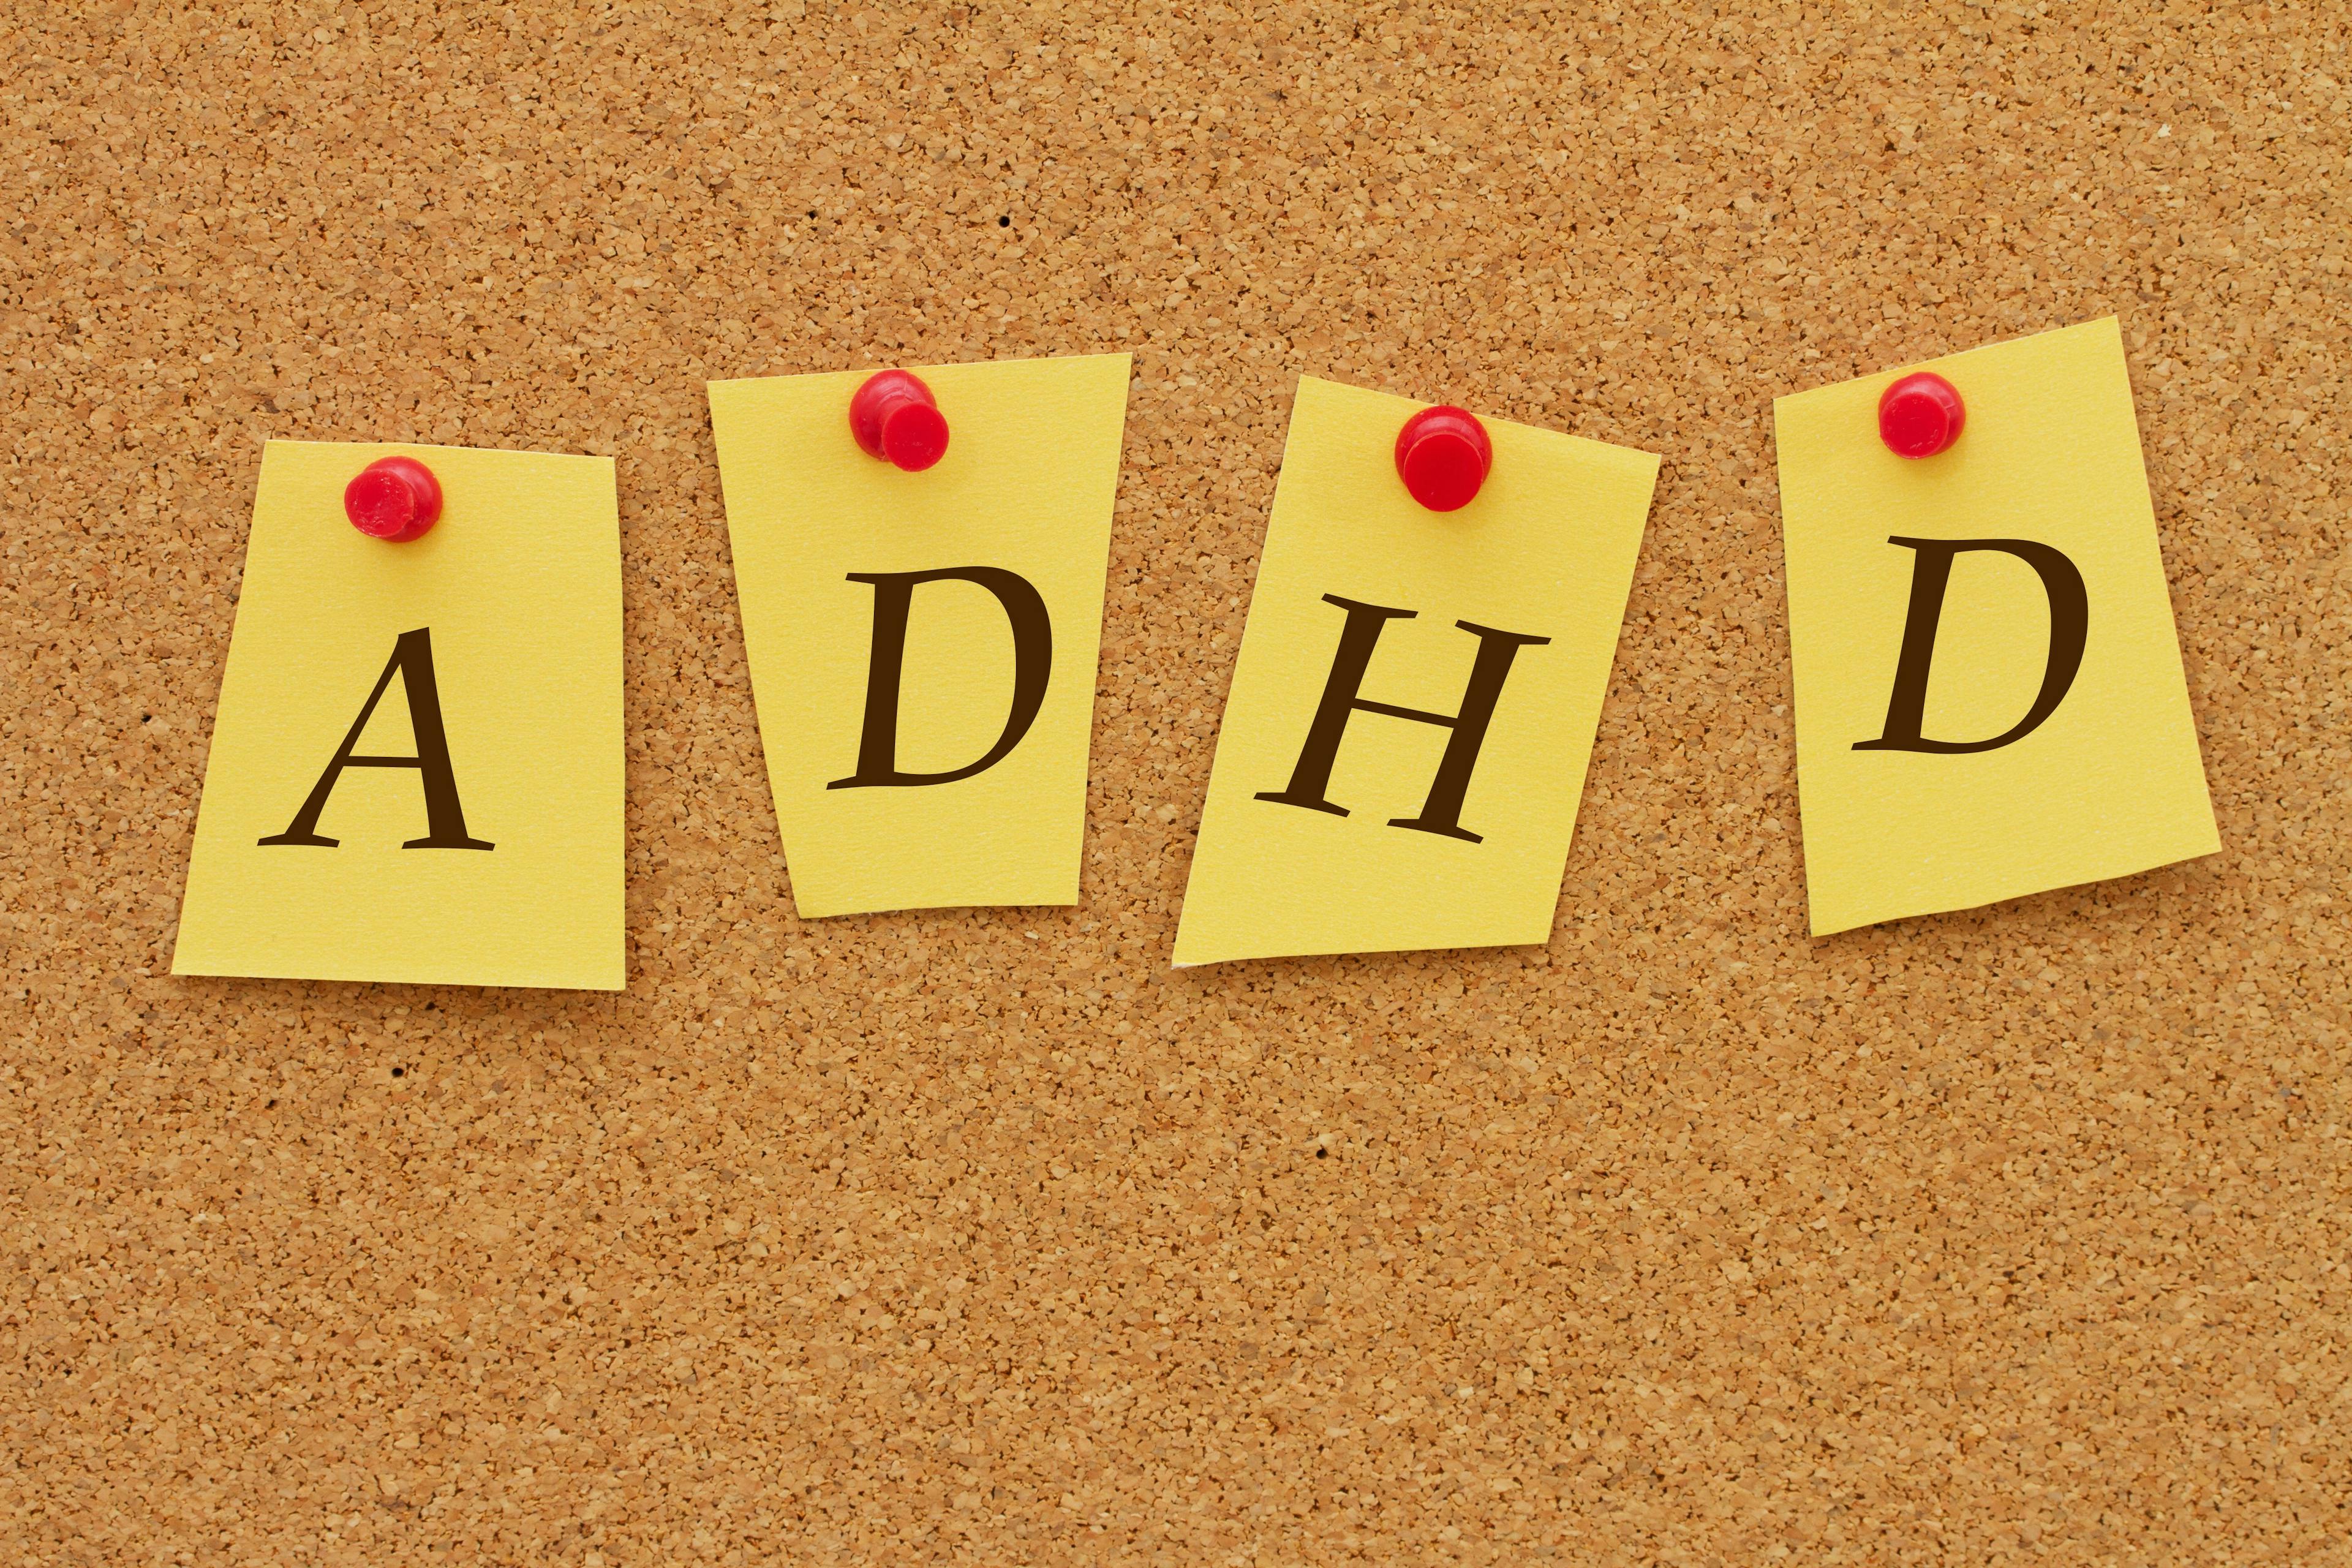 Study Finds Children with ADHD are Less Physically Active